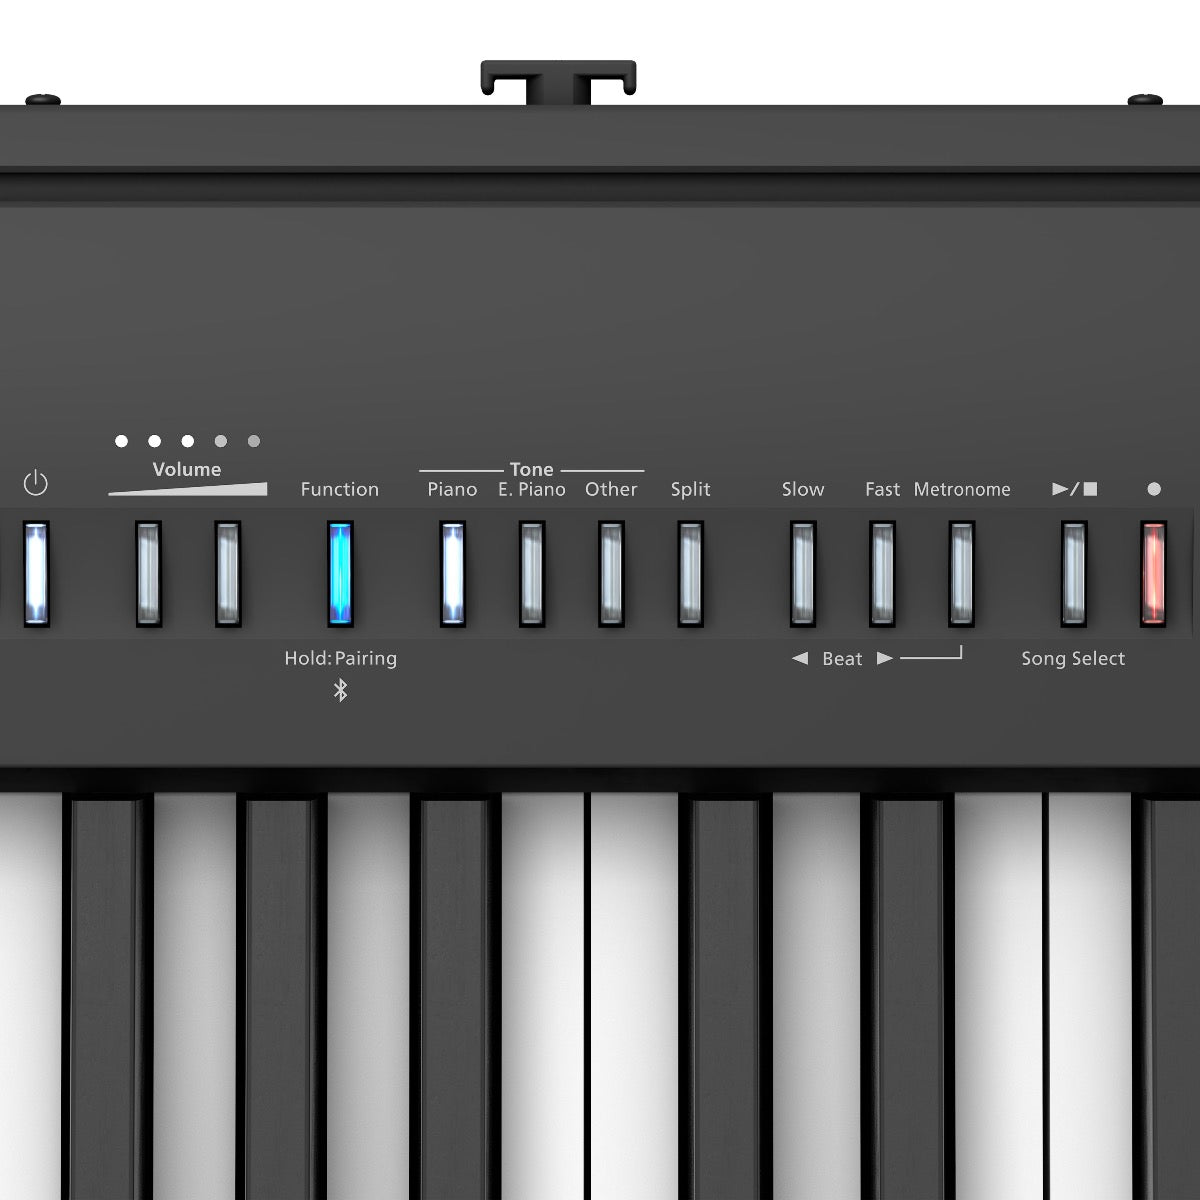 Detail view of Roland FP-30X Digital Piano - Black top panel showing control buttons